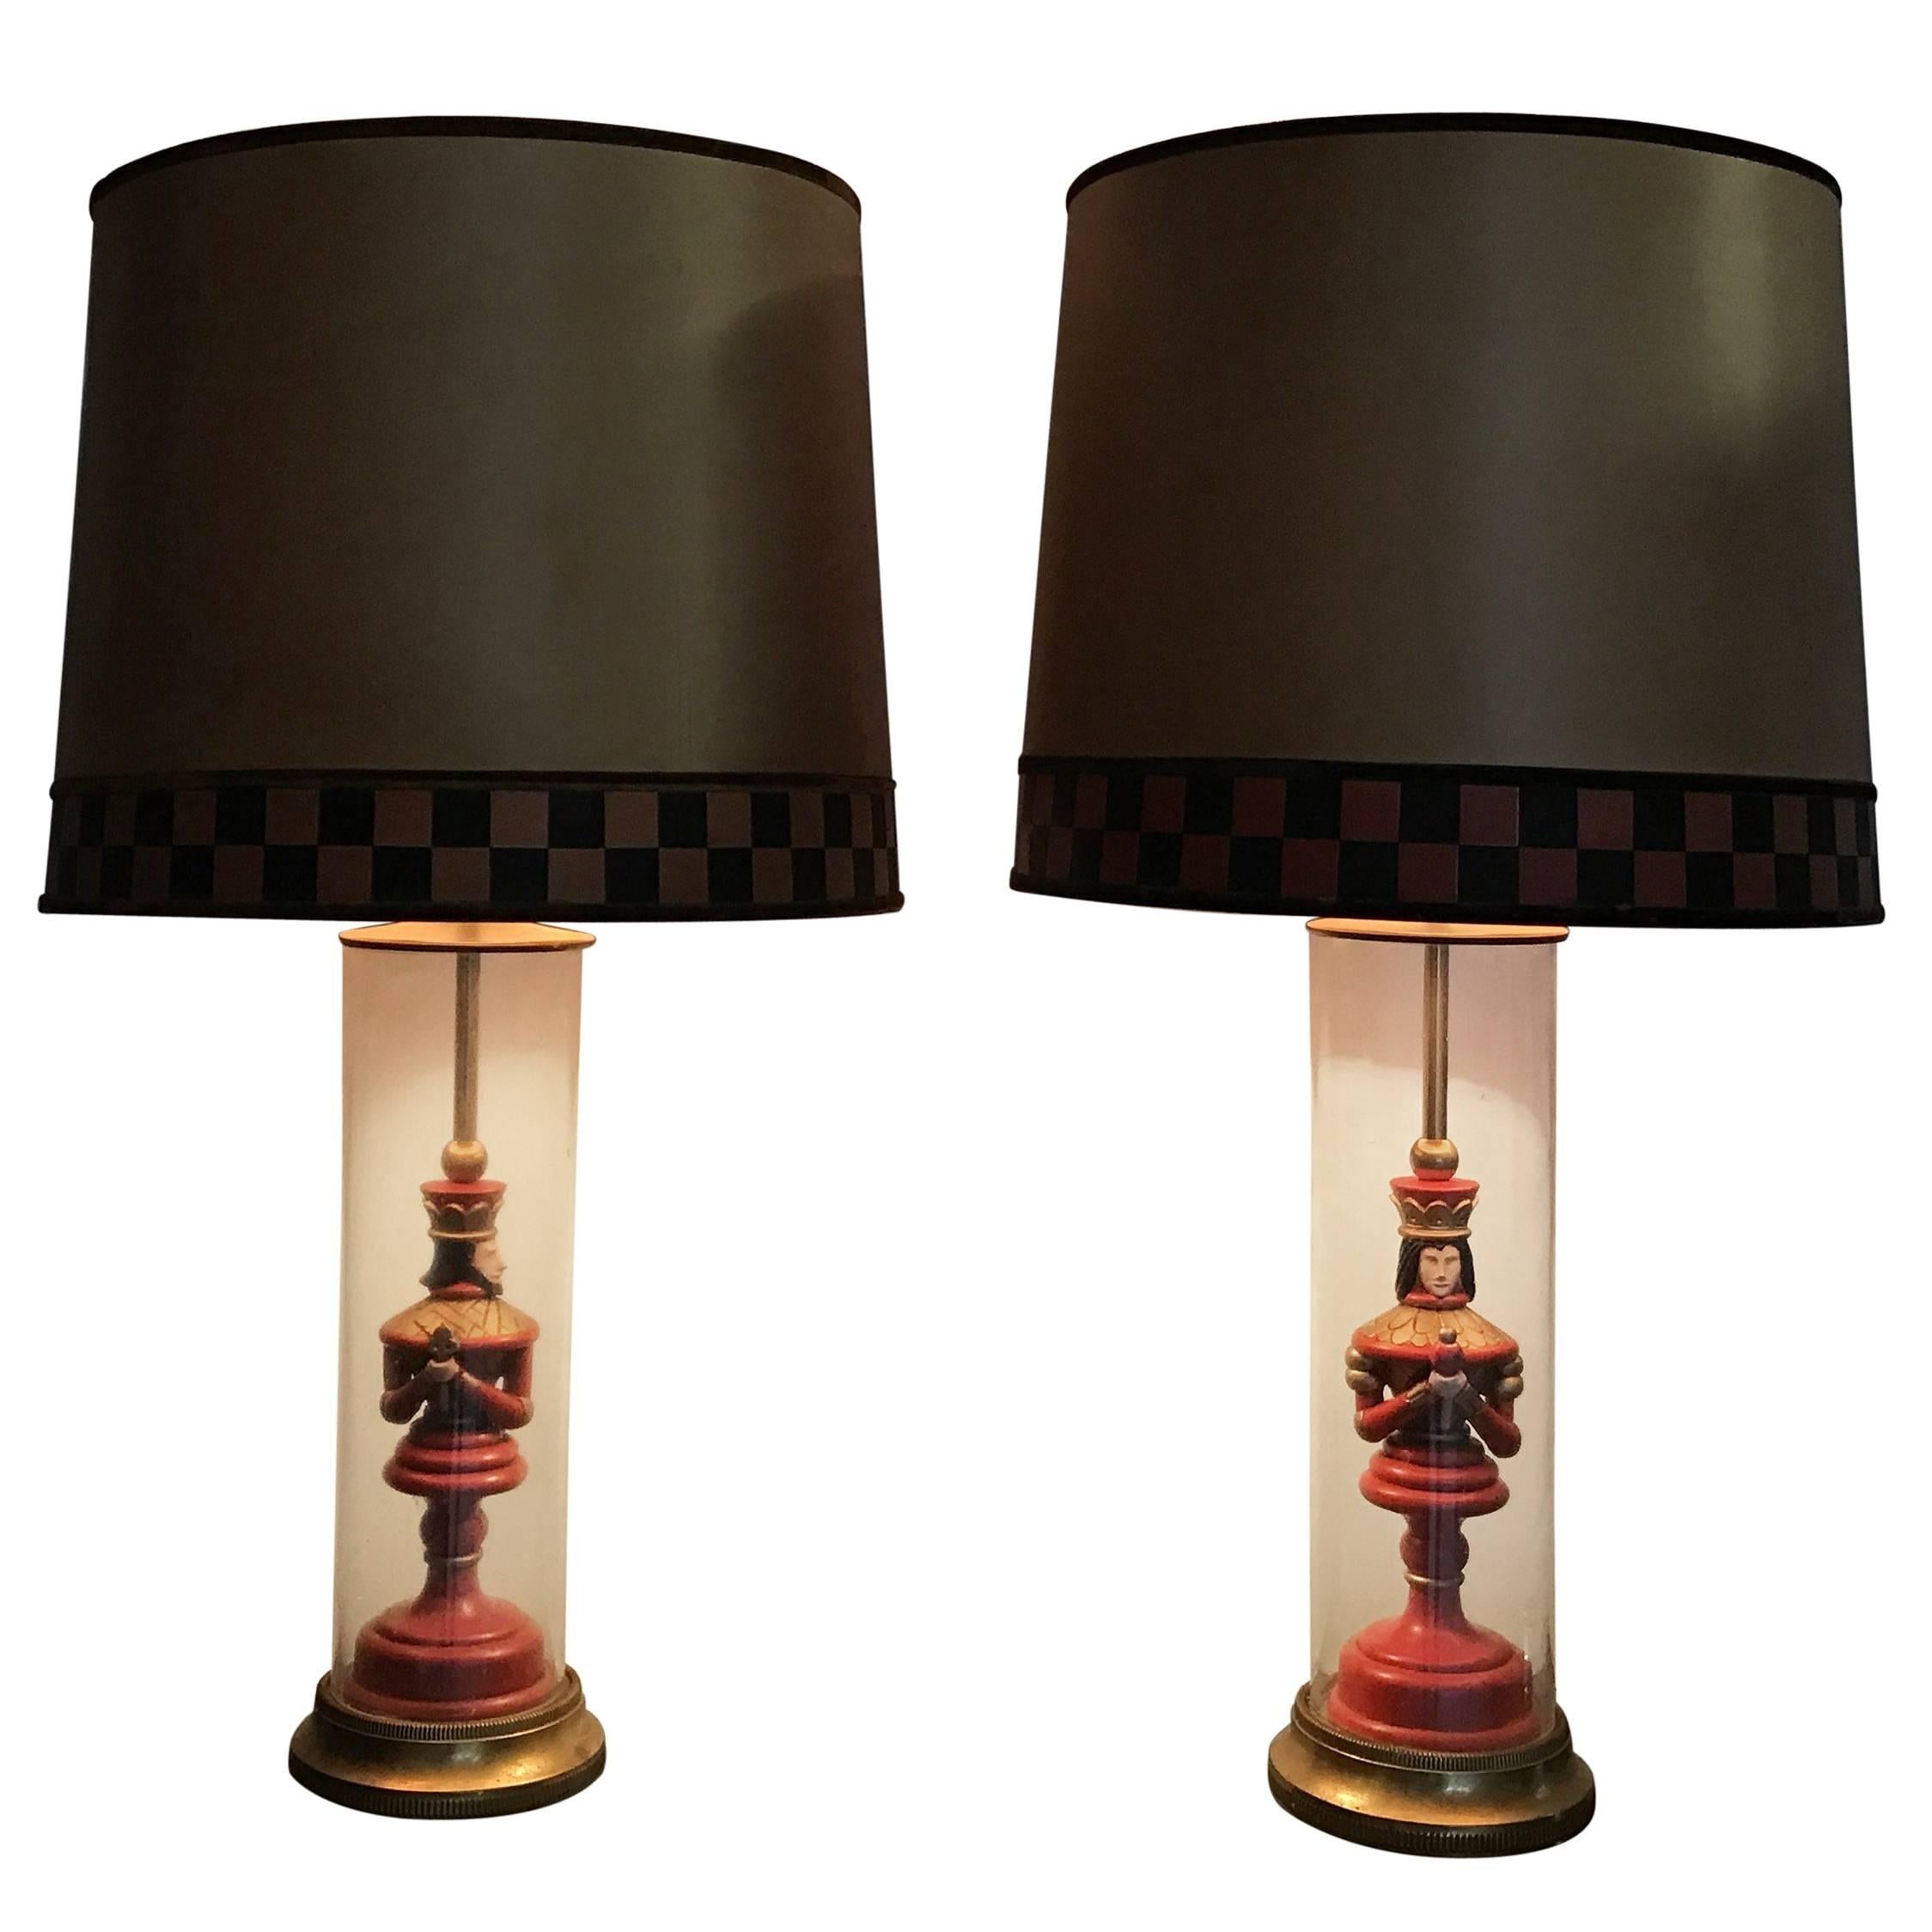 Most Unusual Pair of Whimsical Chess Piece under Glass Table Lamps